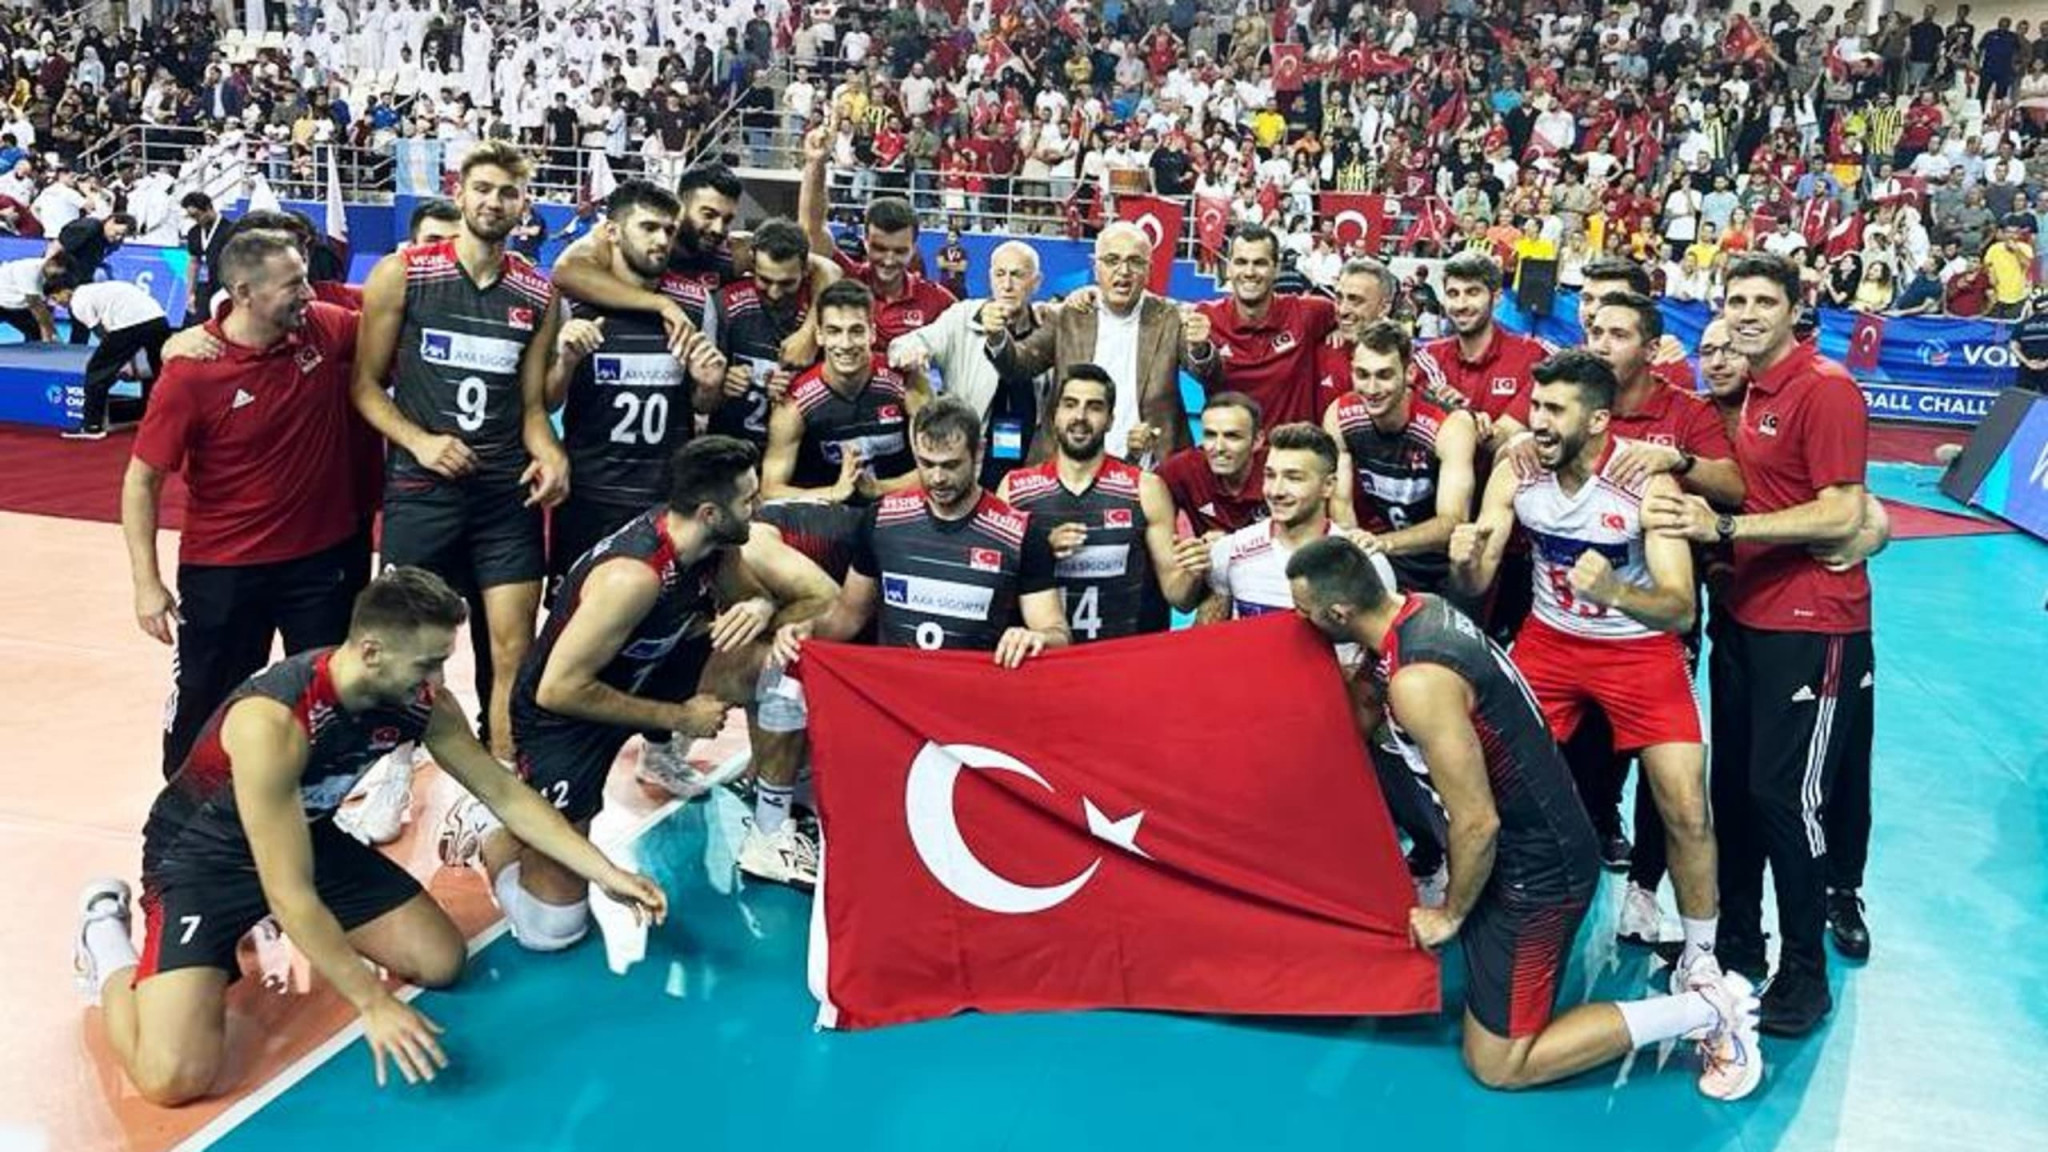 Turkey beat hosts Qatar to win the men's Volleyball Challenger Cup and qualify for the Volleyball Nations League ©Volleyball World